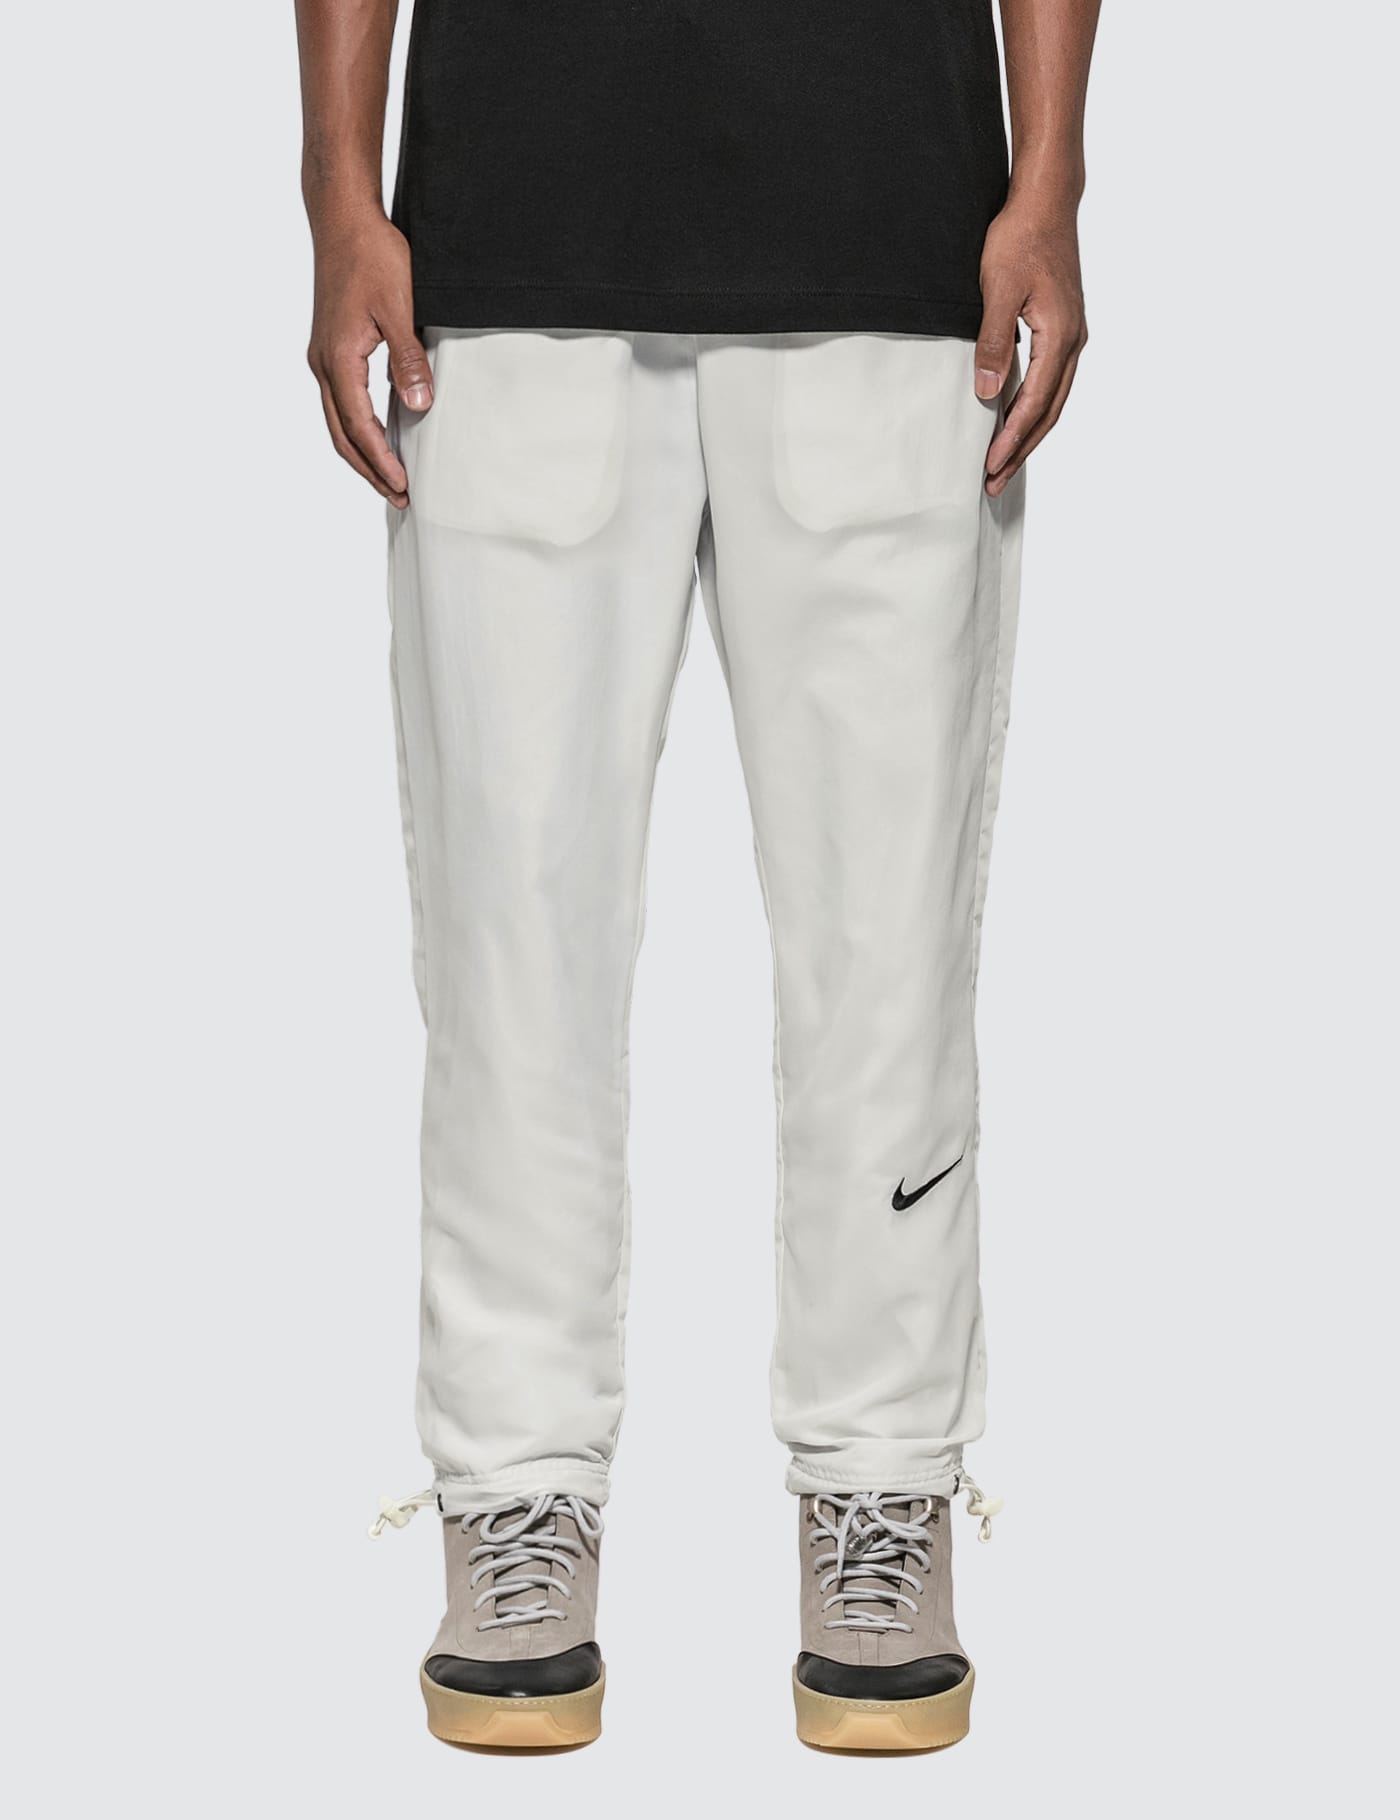 Fear of God X NIKE Woven PANT